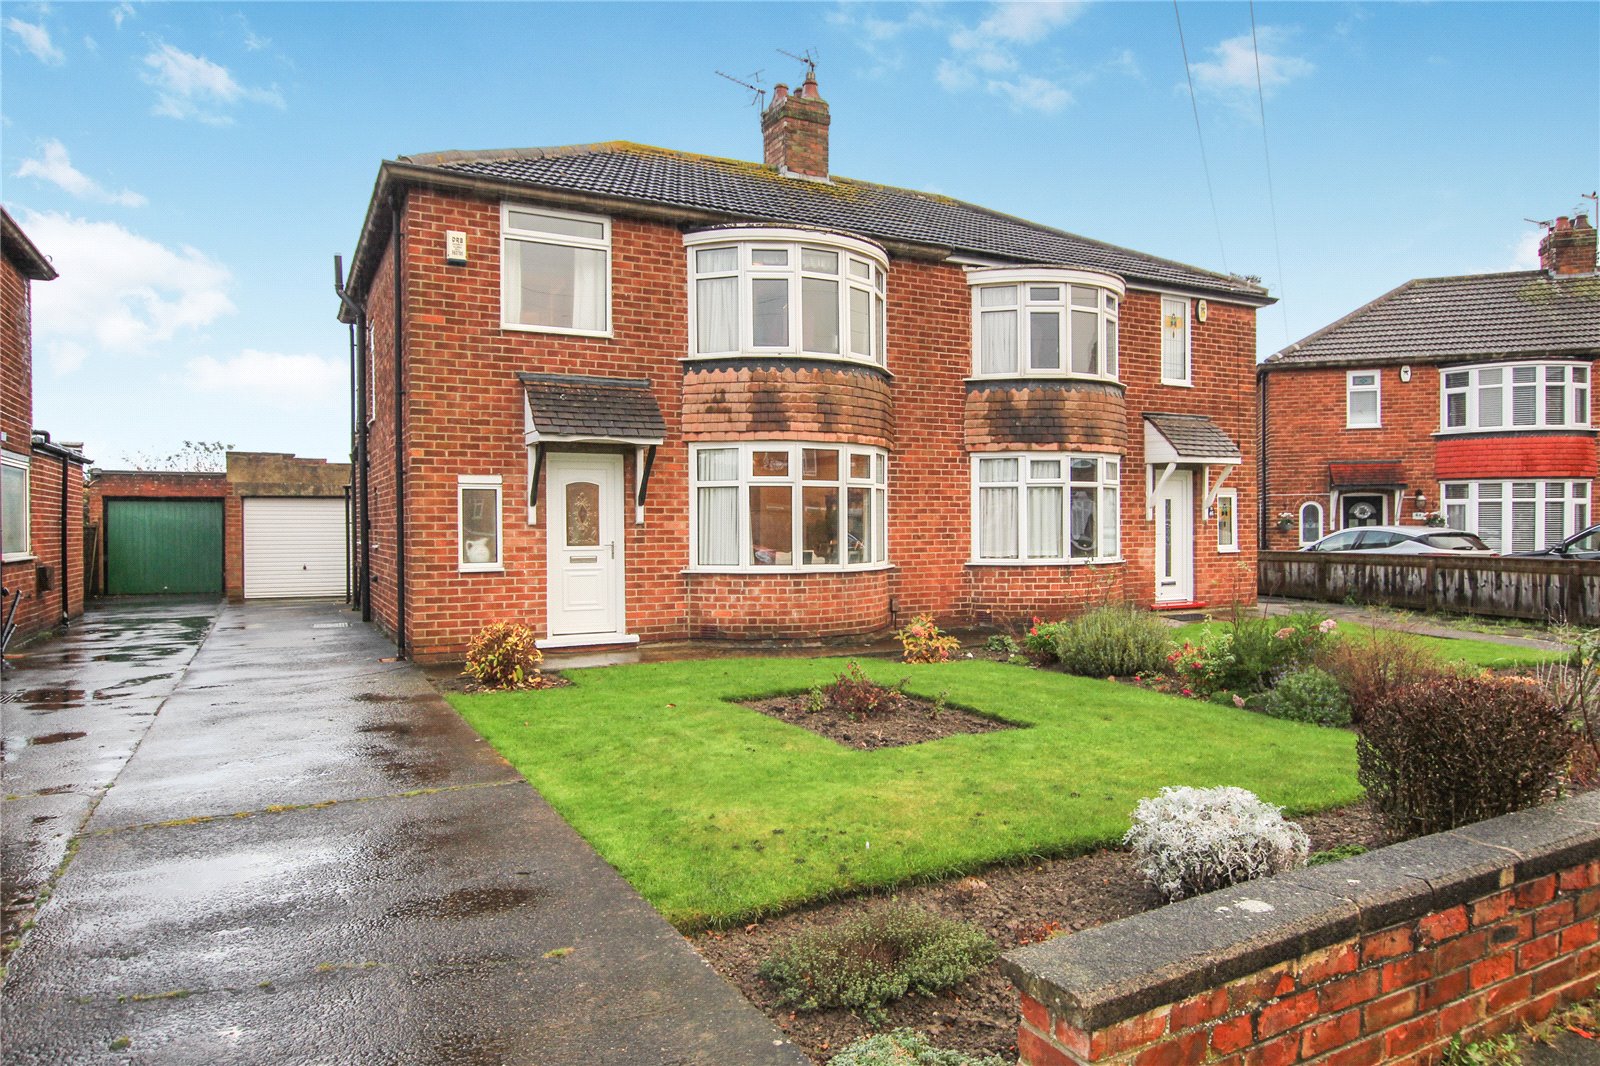 3 bed house for sale in Stanhope Grove, Acklam - Property Image 1